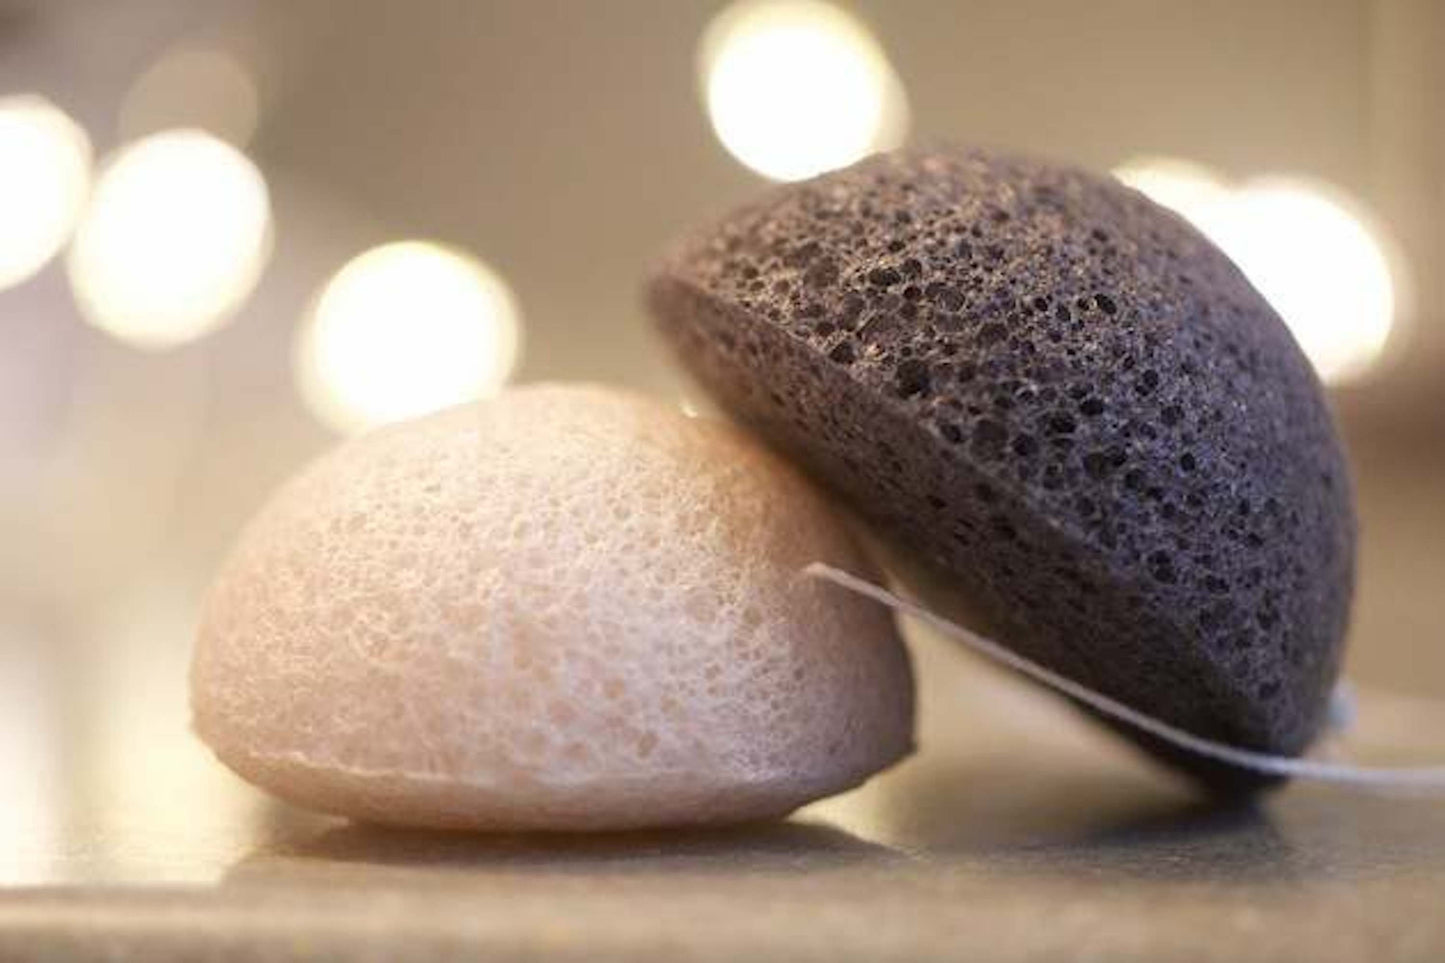 FREE Storage Bag Body Scrubber! Natural Konjac Sponge Made With High-Quality Ingredients Cleanse Exfoliates Smoother Brighter Looking Skin  17.99 Indigo Paisley